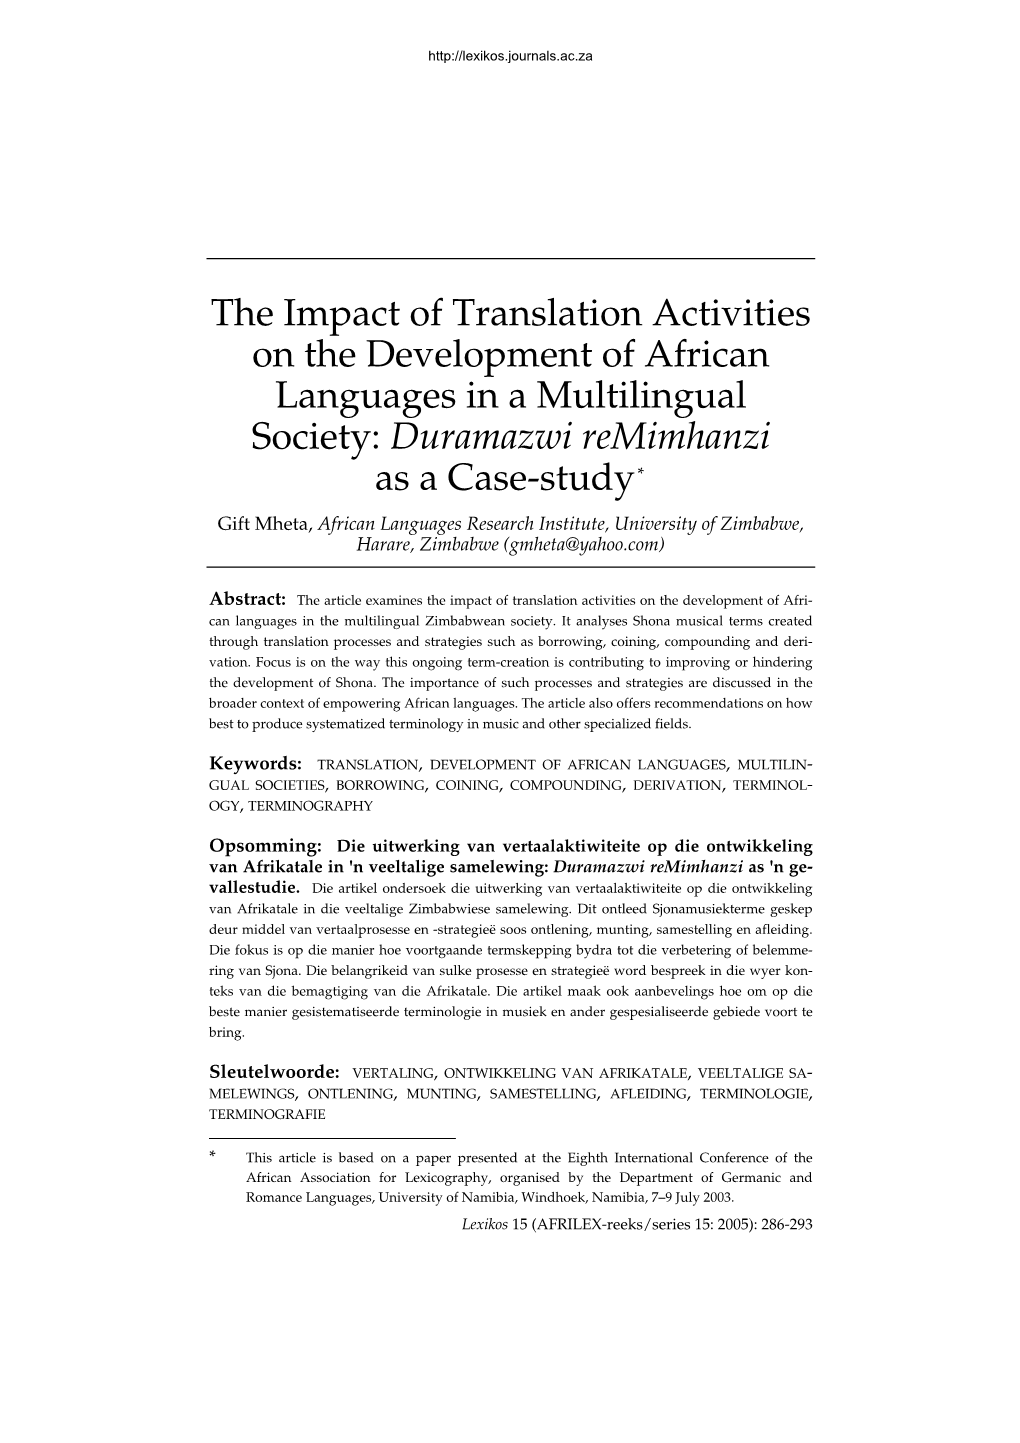 The Impact of Translation Activities on the Development of African